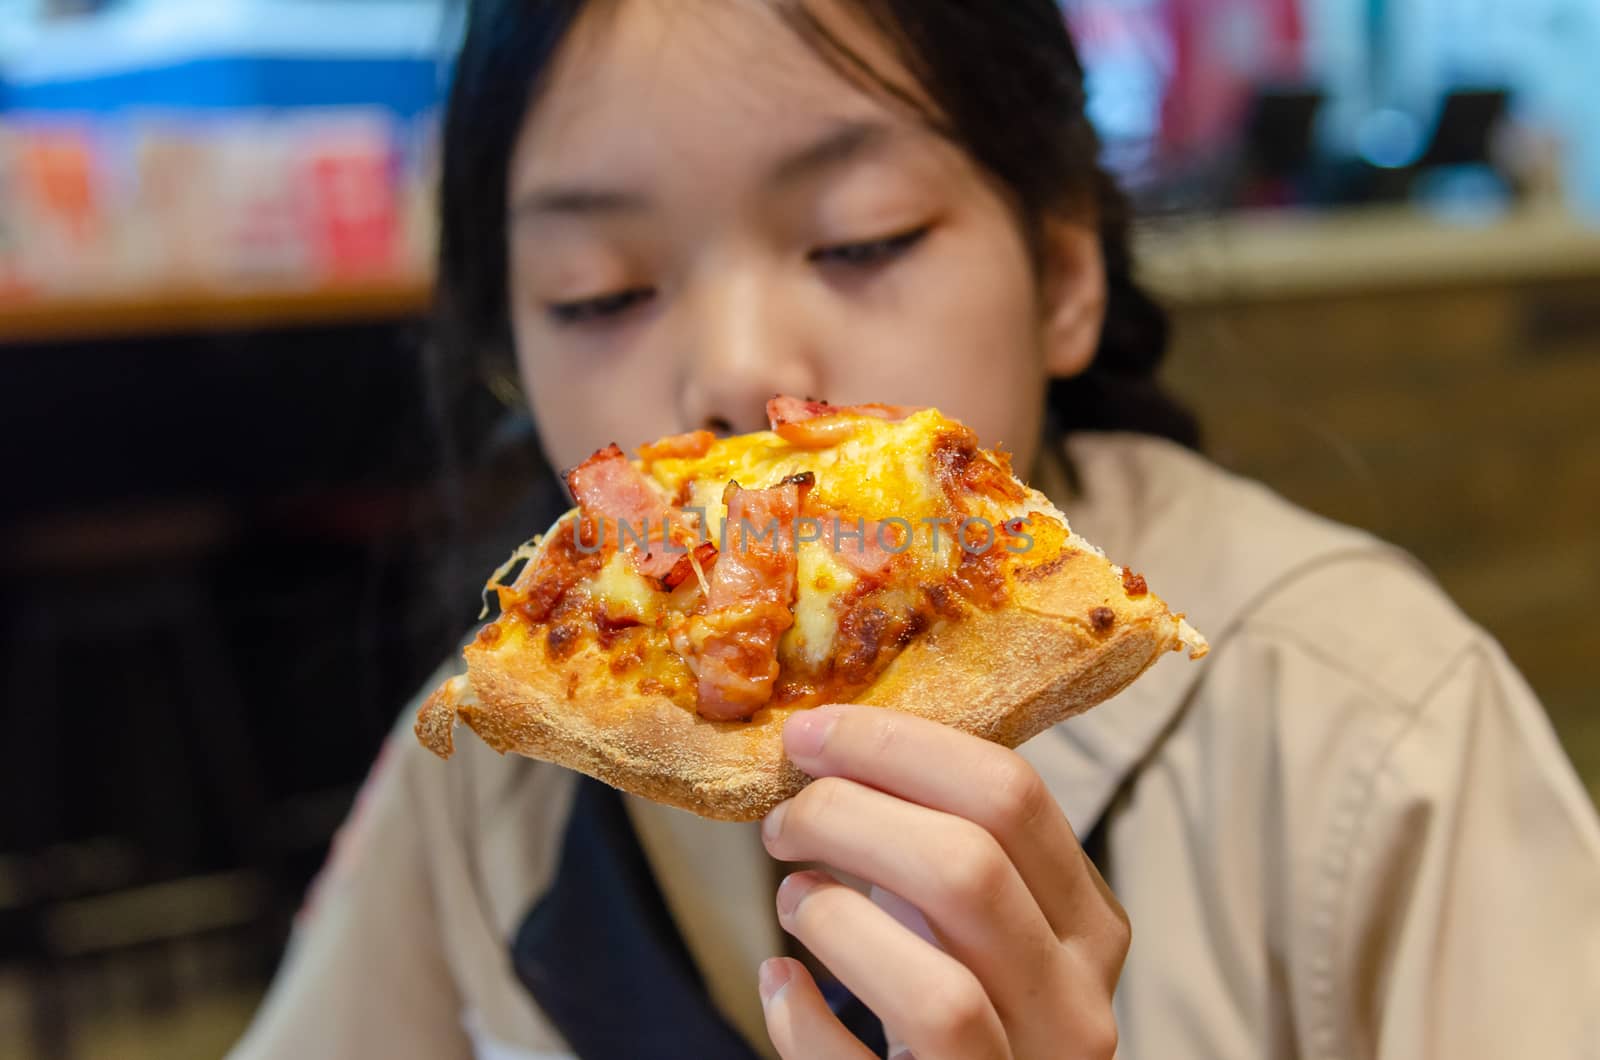 Beautiful Asian girl eating pizza in the restaurant.